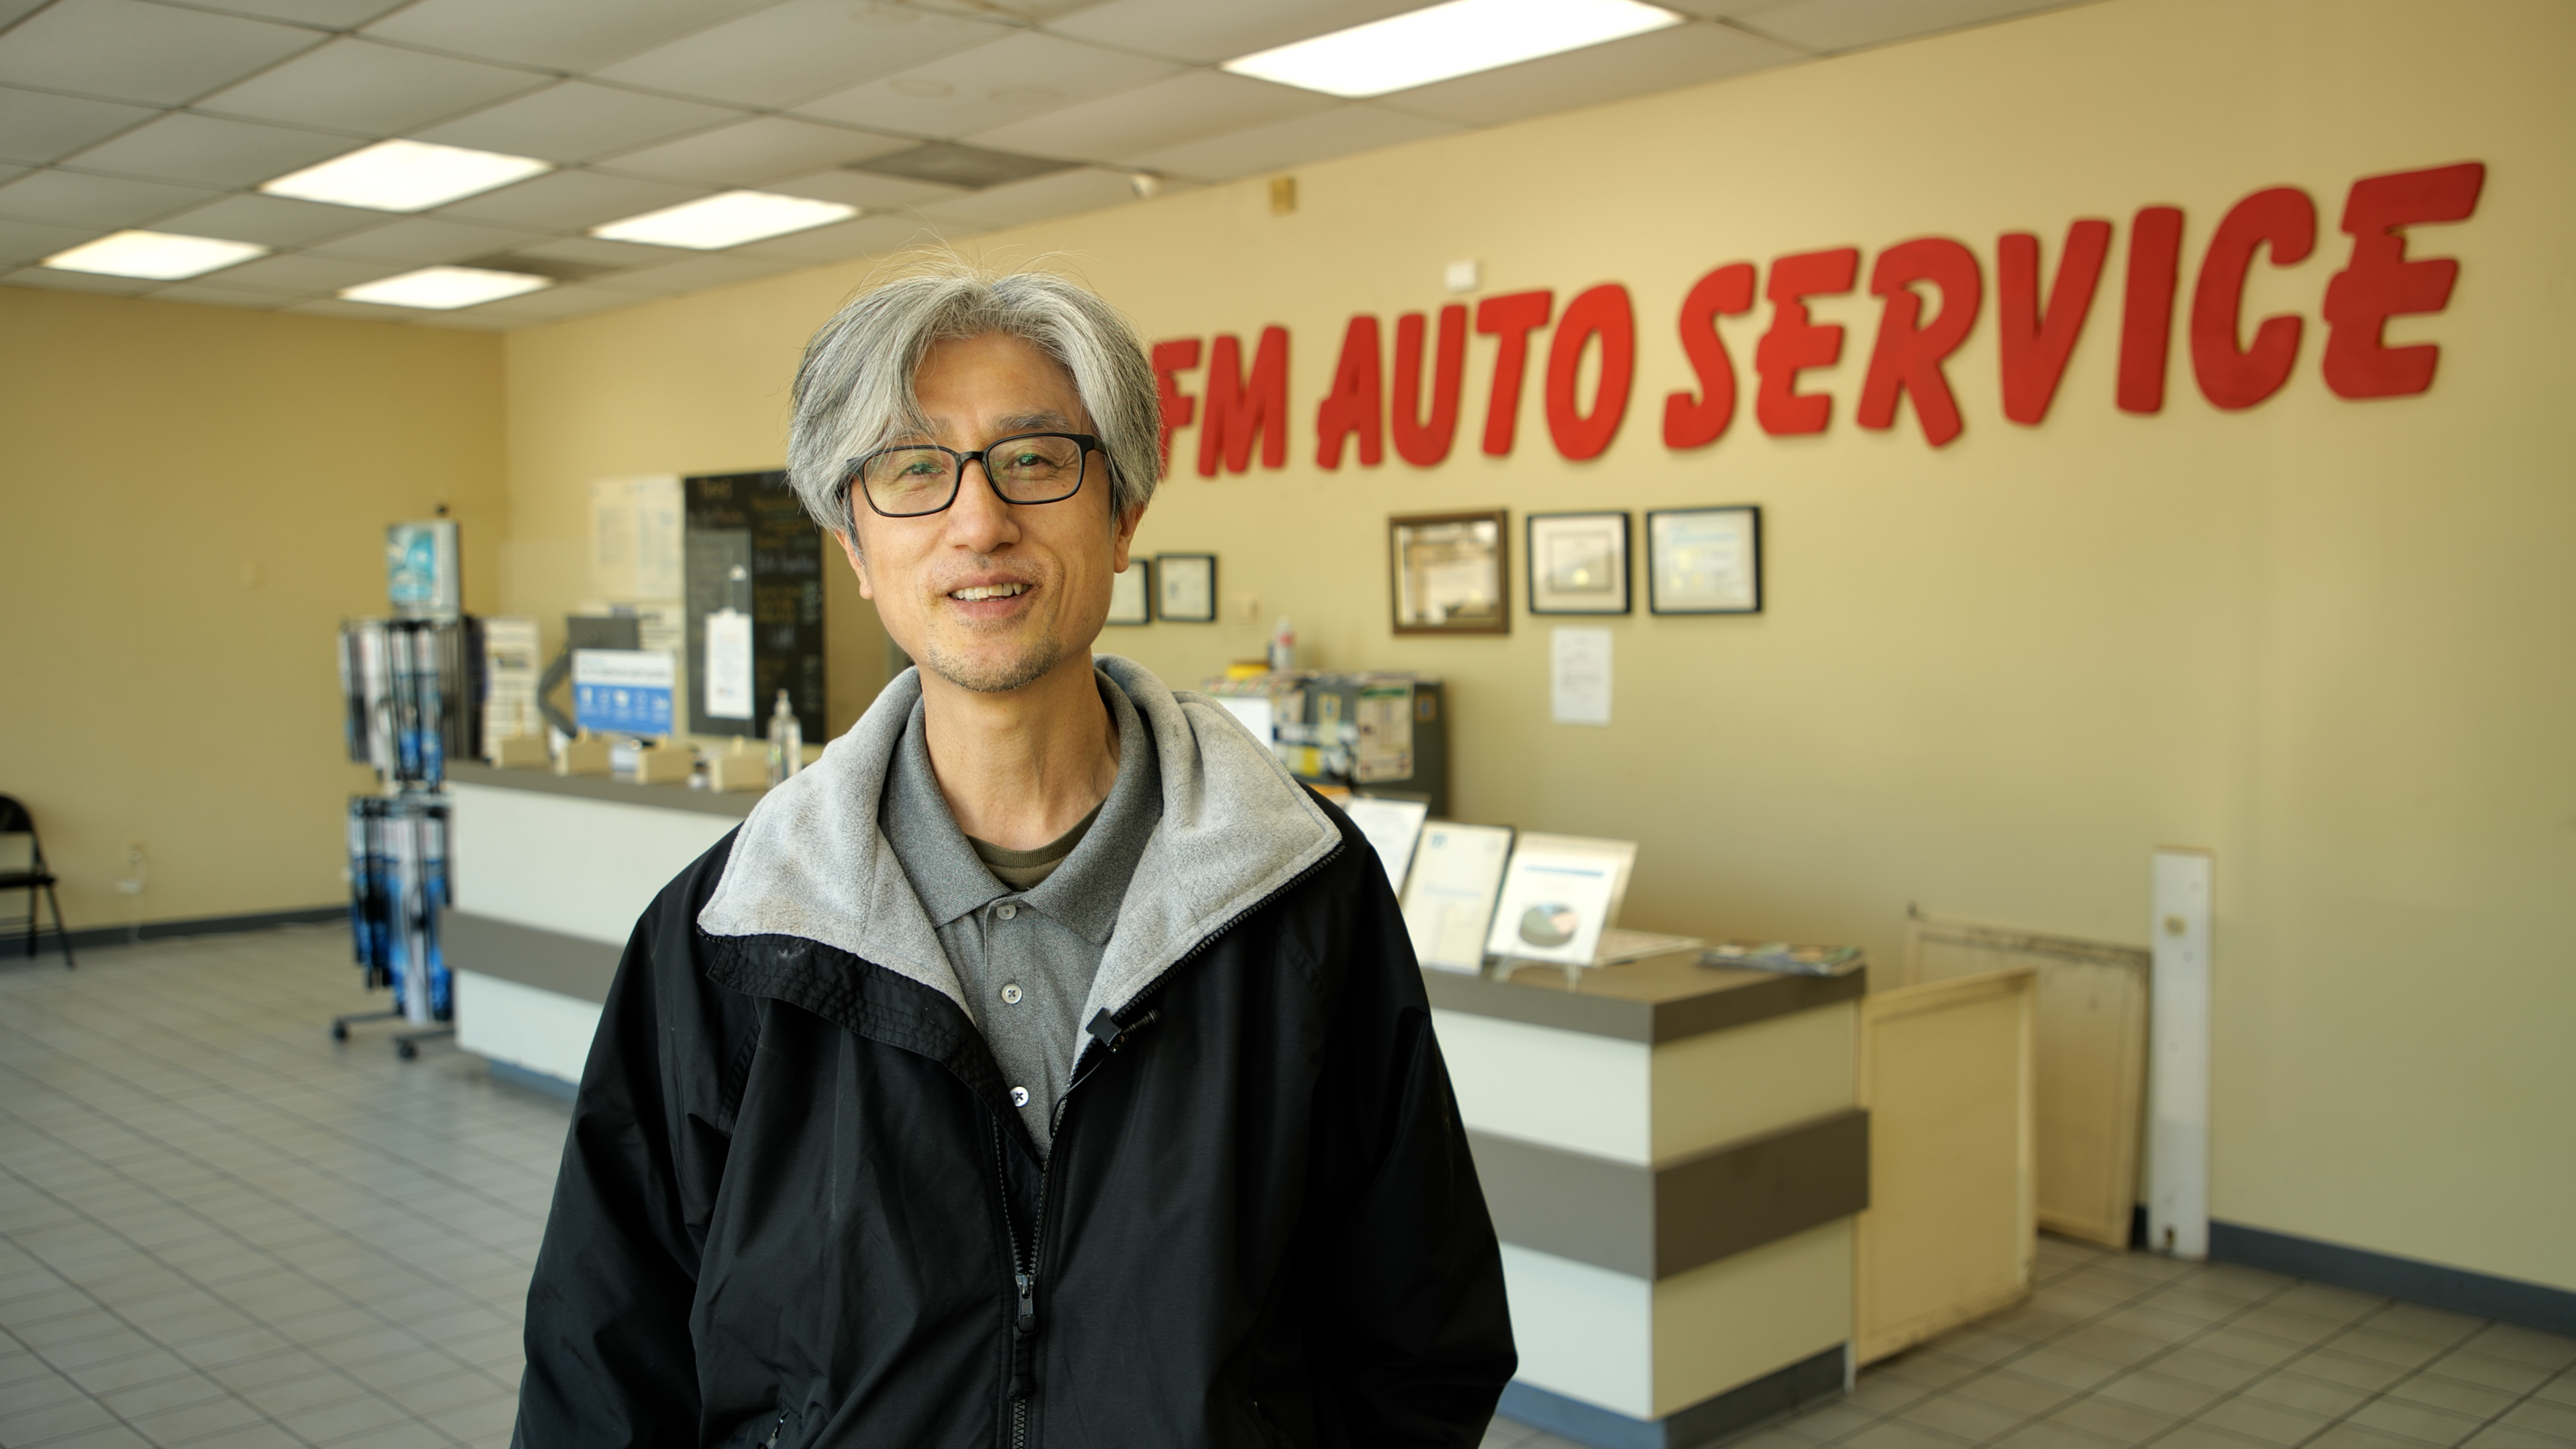 FM Auto Service, a car repair business in East Charlotte owned by Kevin Pak, received a grant from the Beyond Open CLT grant program.